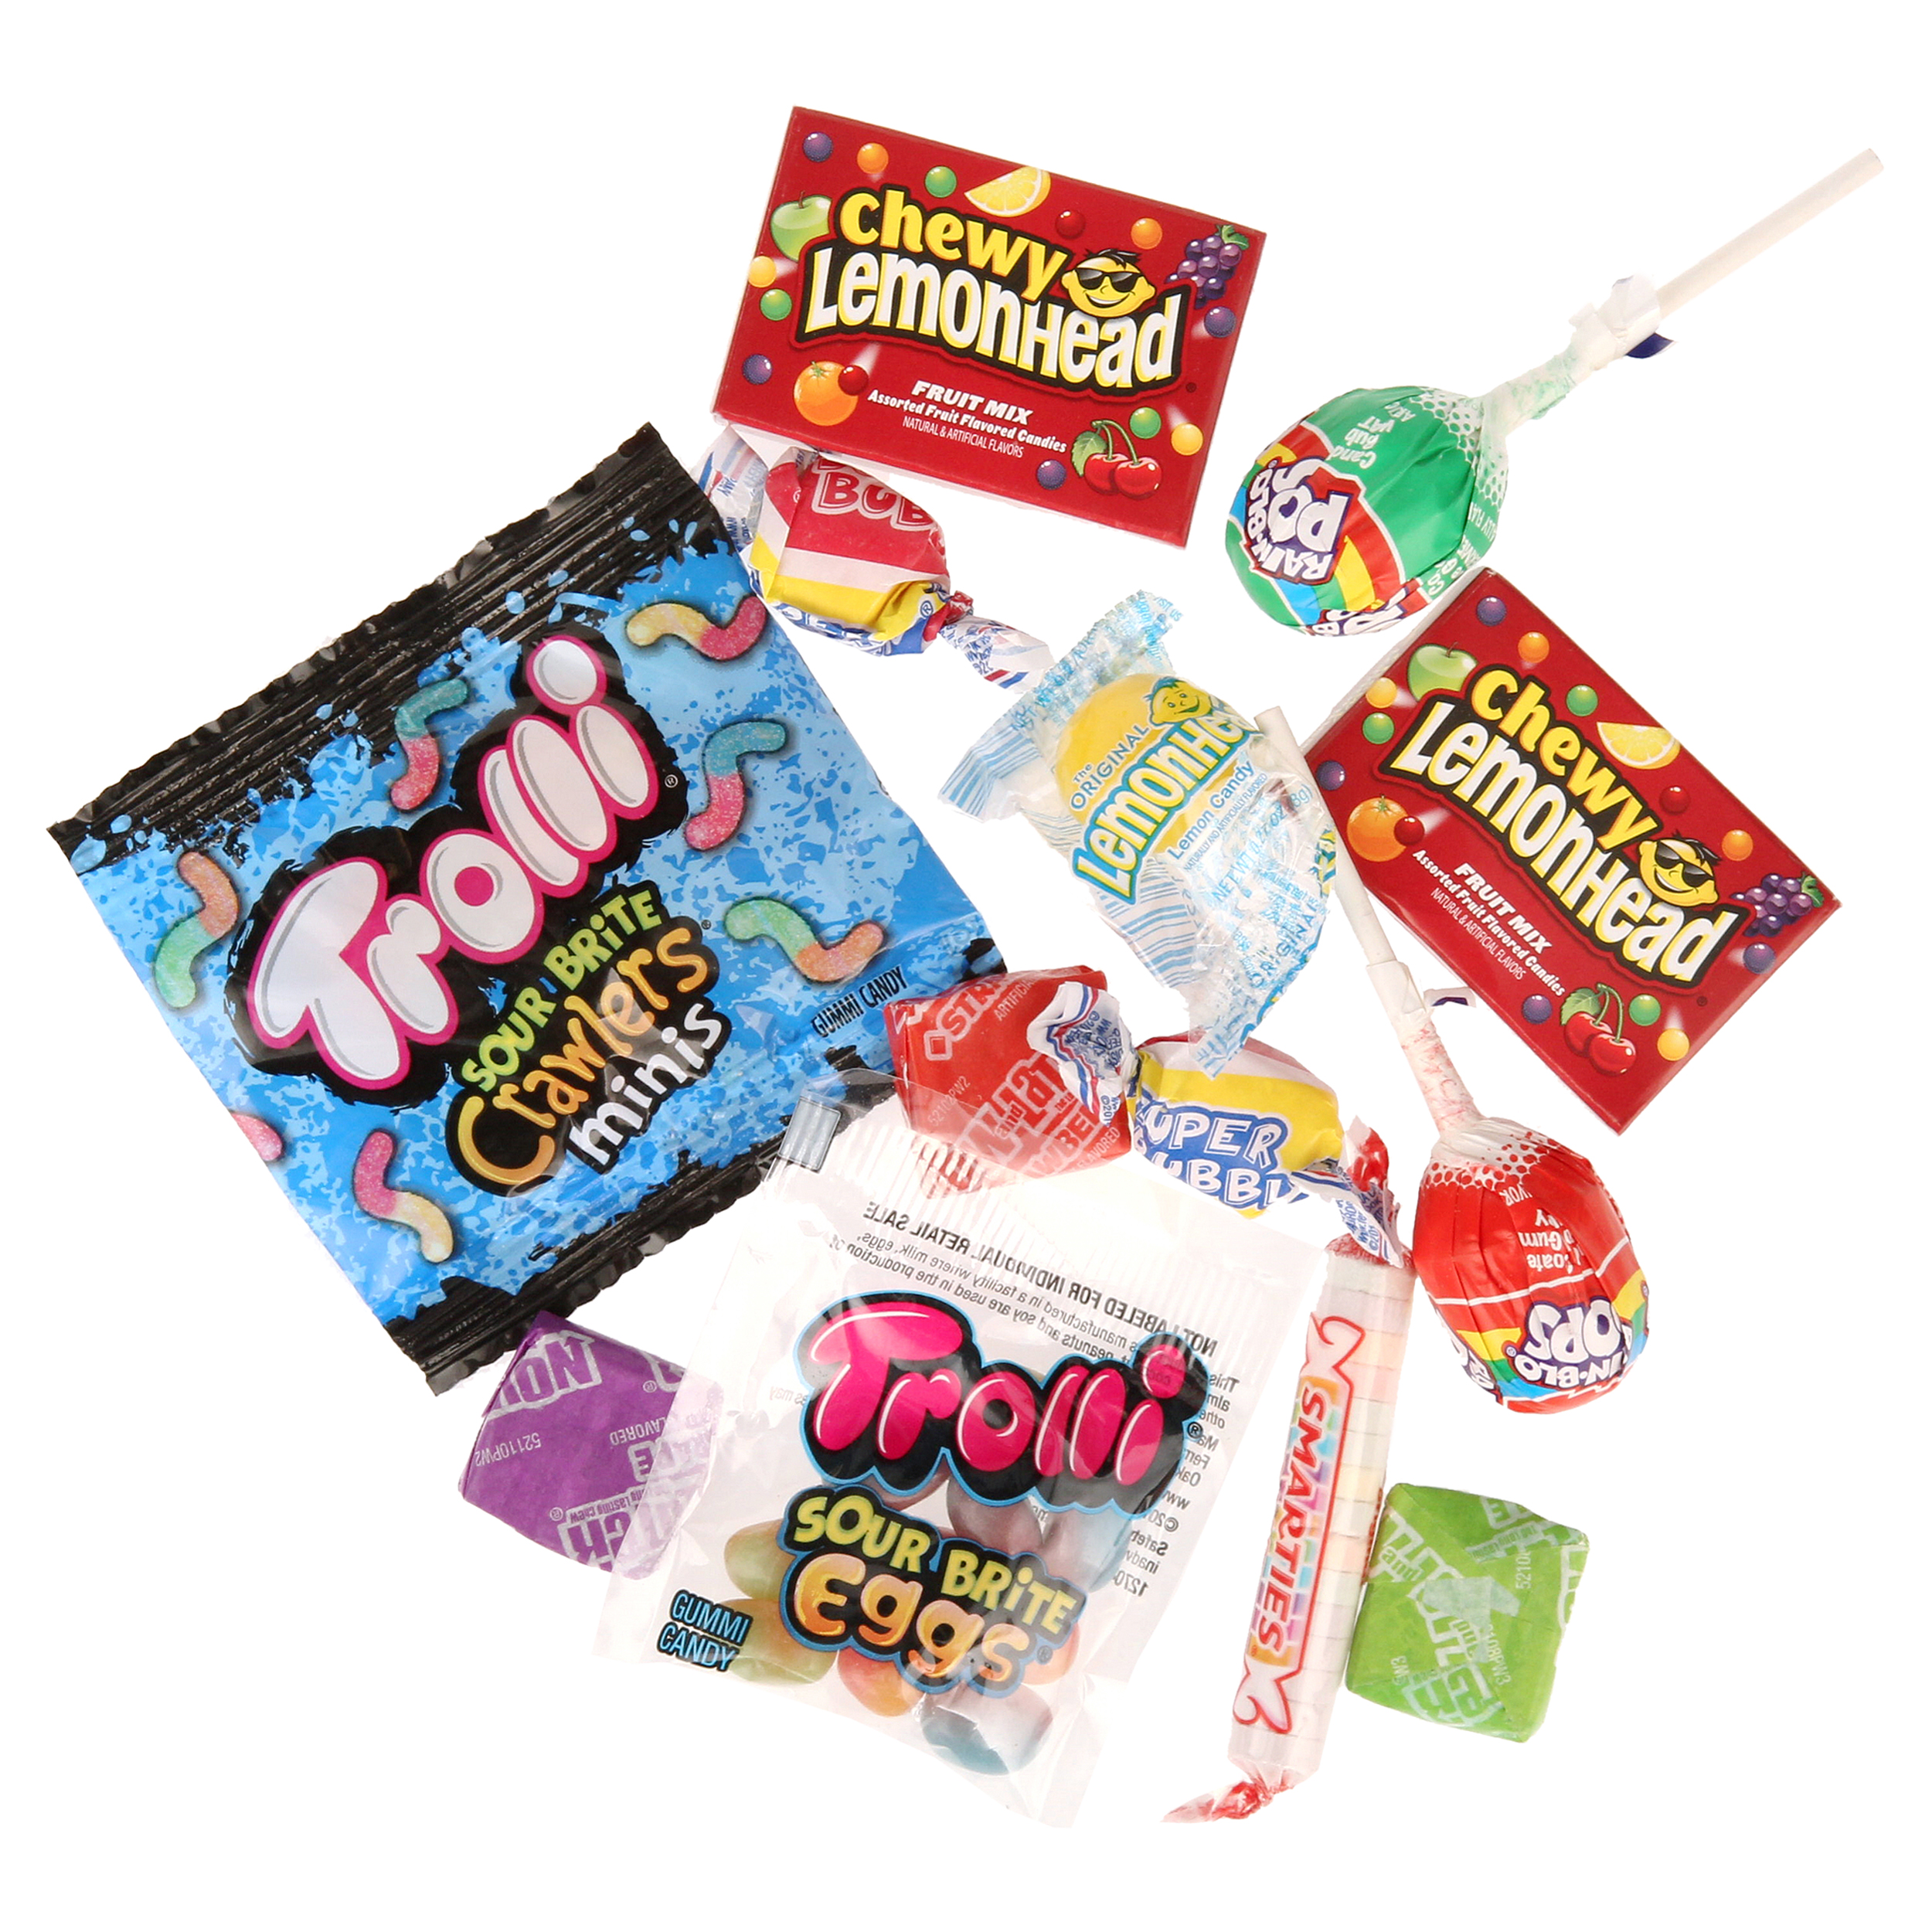 Brach's Kiddie Assorted Candy Bag, 48 Oz (145 Pieces) - image 3 of 5